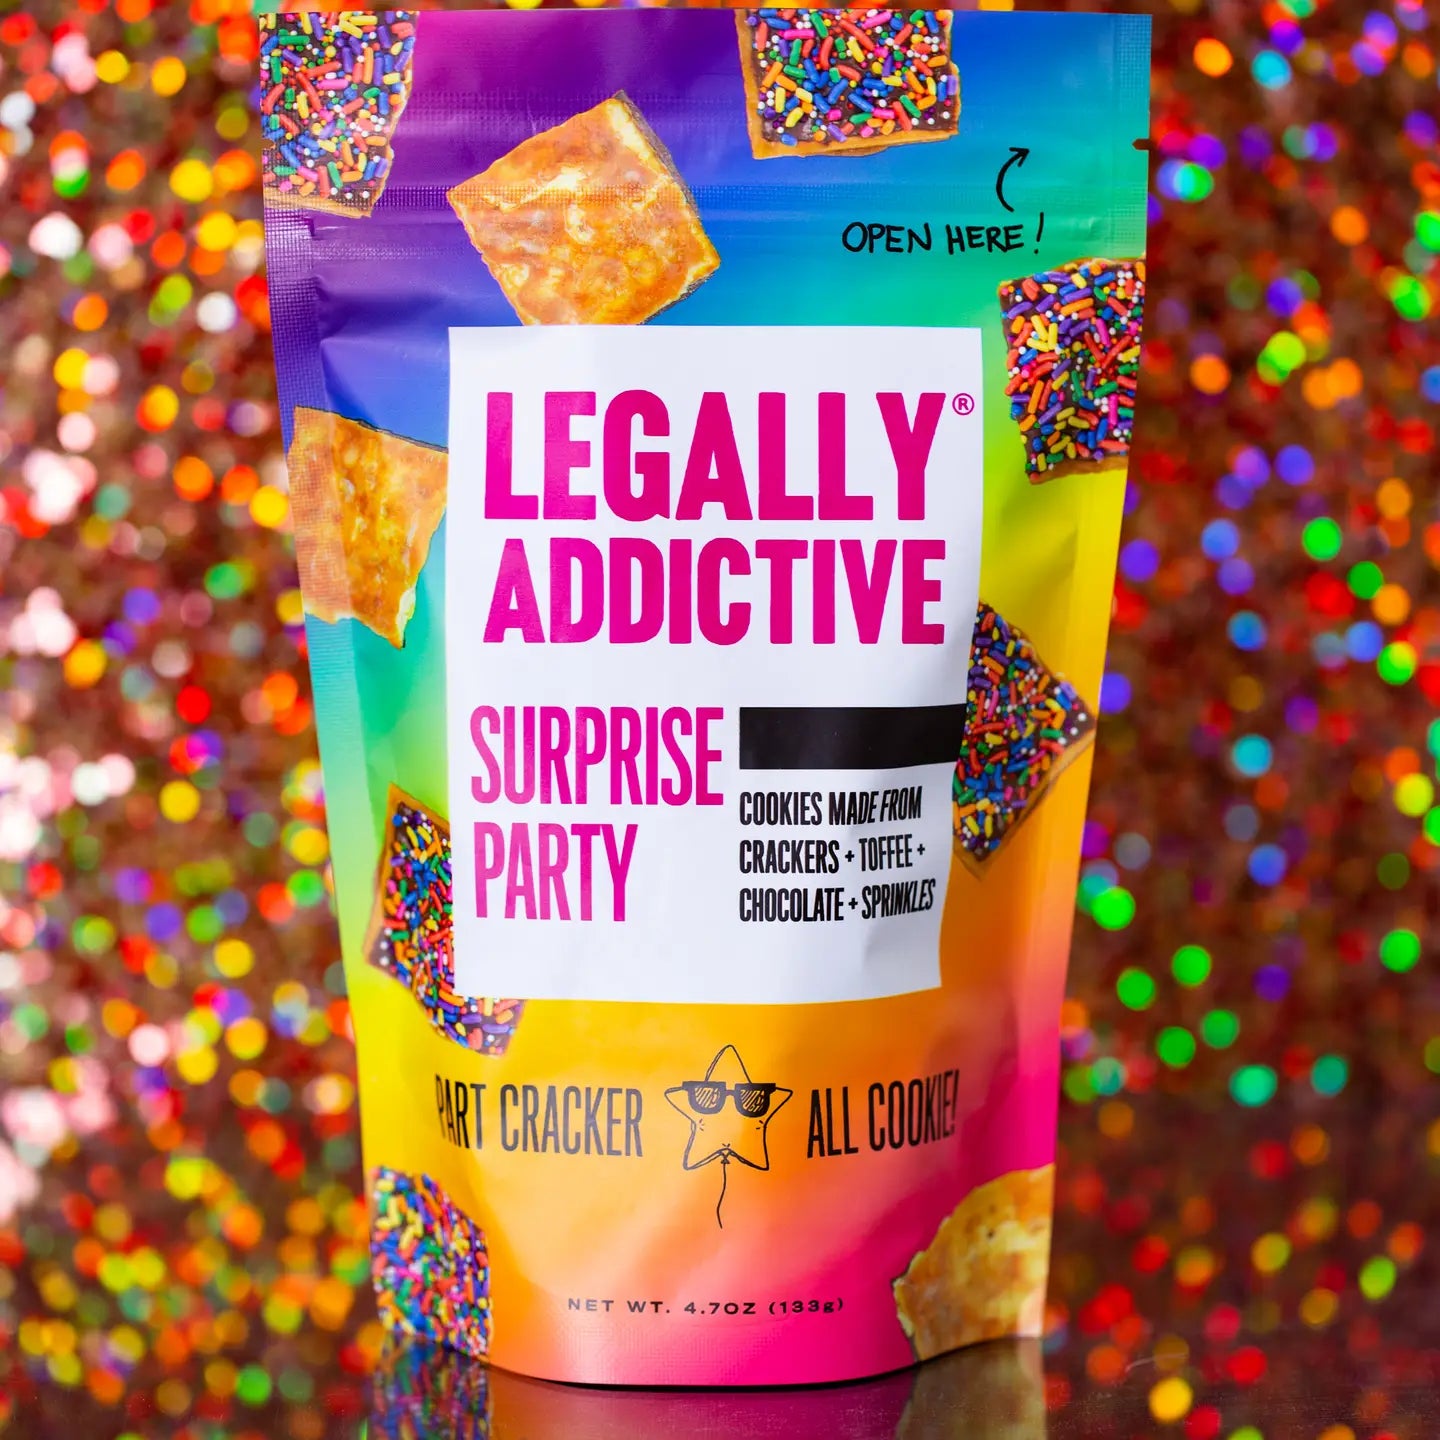 Surprise Party legally Addictive snack